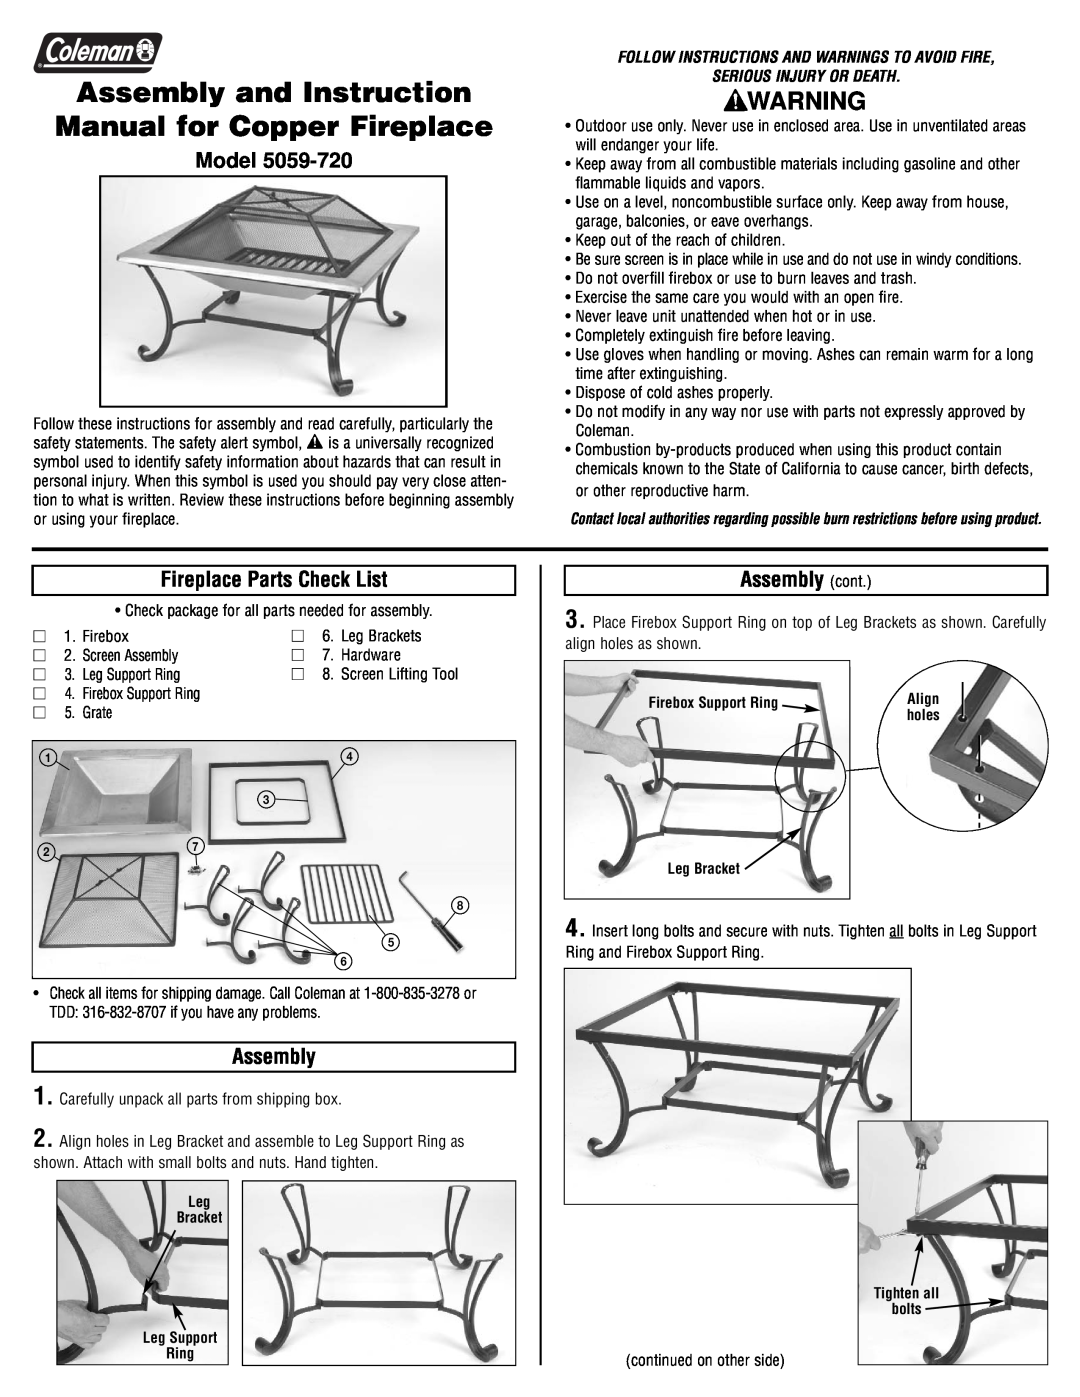 Coleman 5059-720 instruction manual Model, Fireplace Parts Check List, Assembly cont, Serious Injury Or Death 